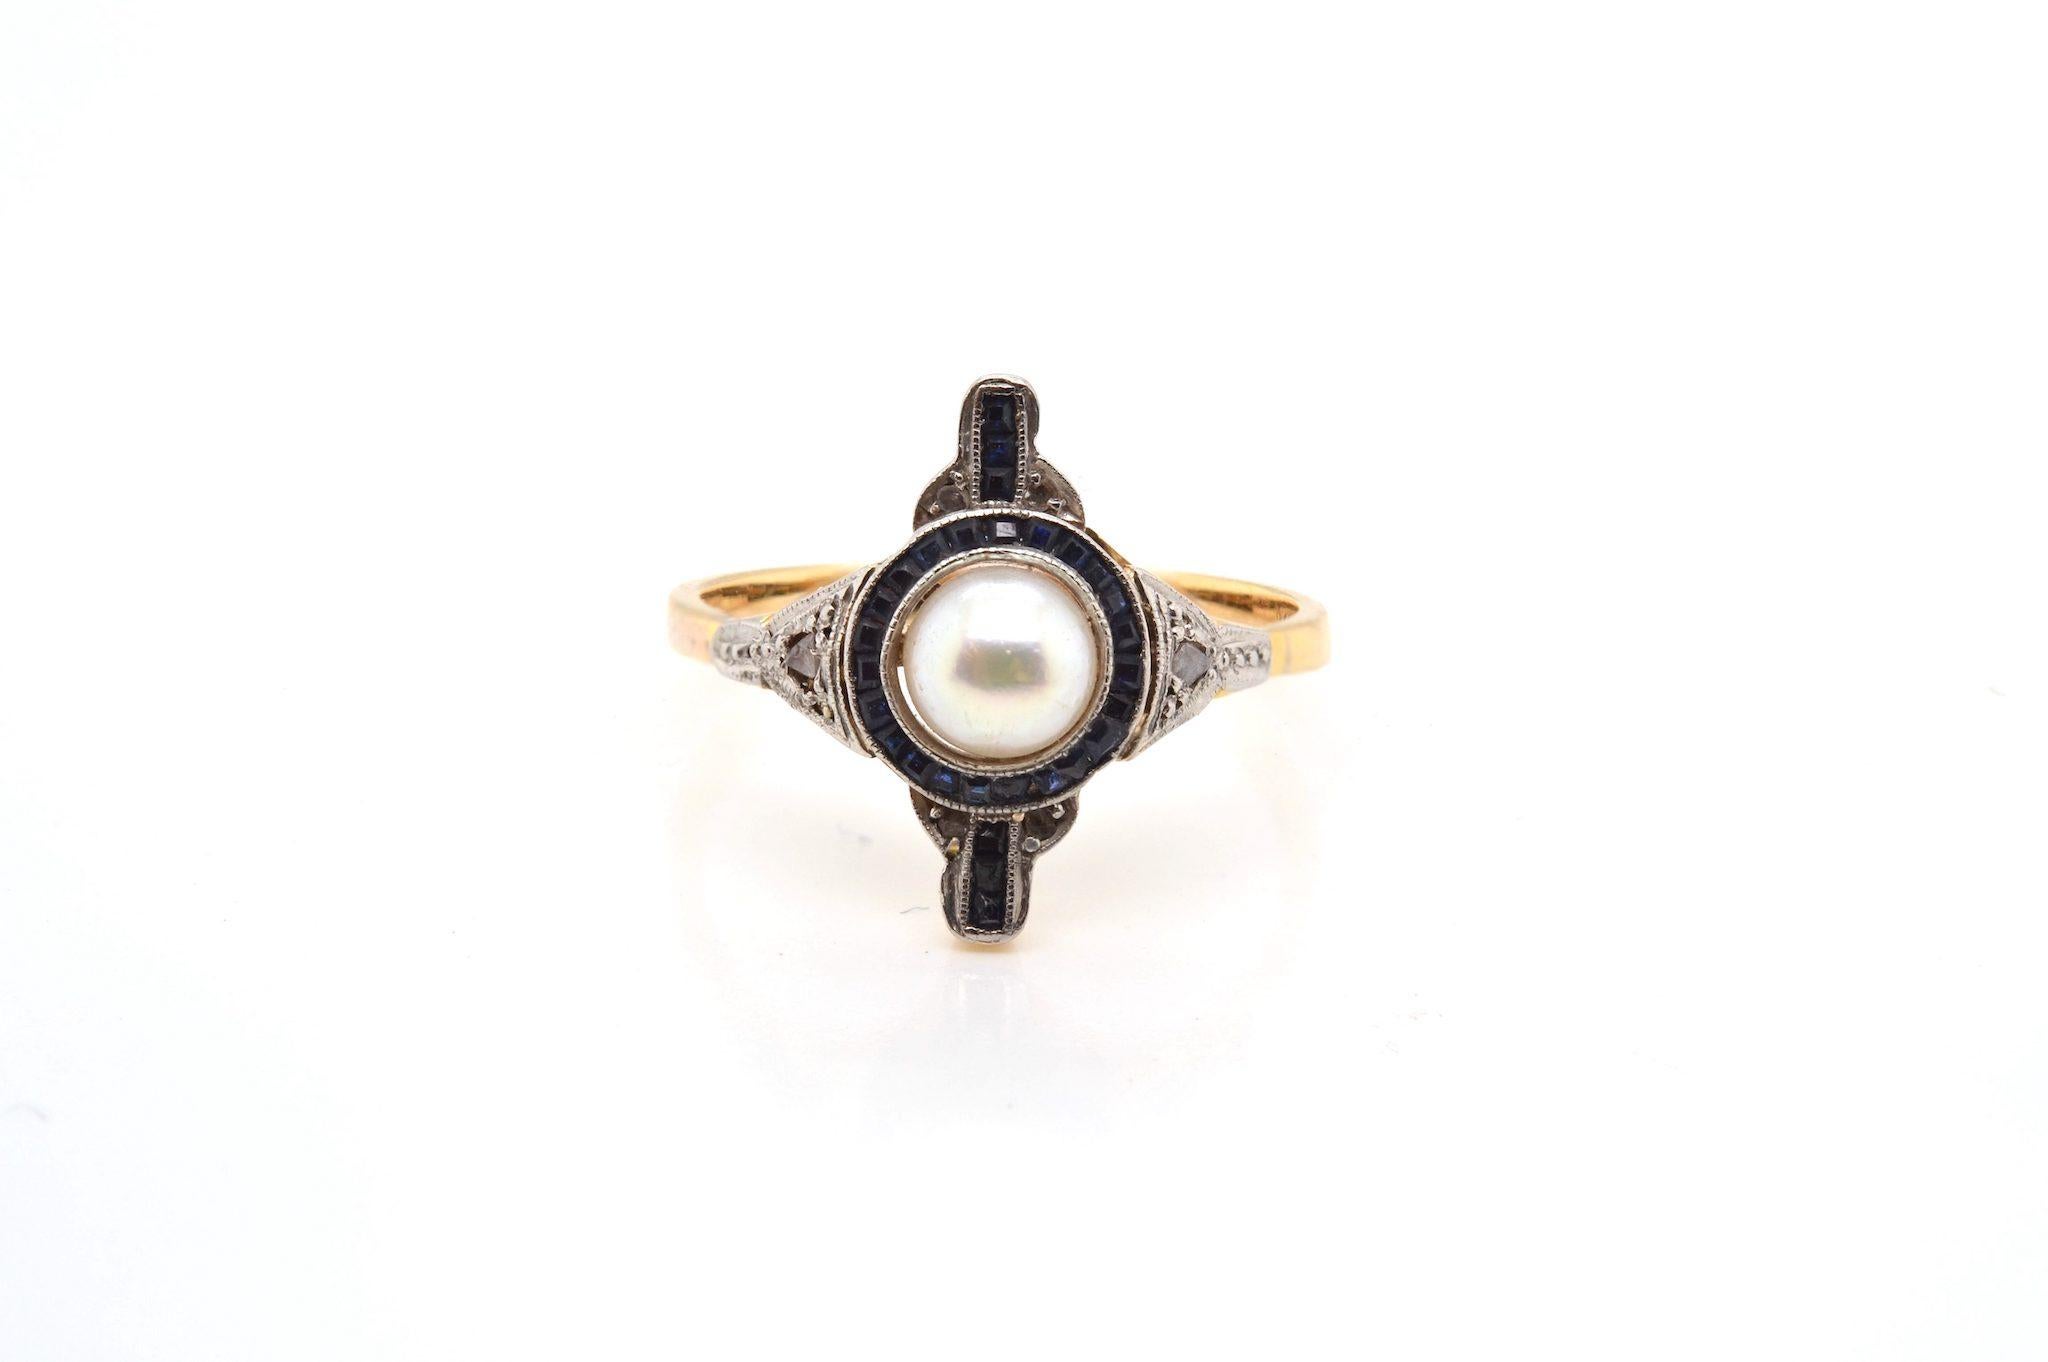 Stones: 1 cultured pearl of 6mm, calibrated sapphires and small diamonds
Dimensions: 1.6cm x 1.2cm
Material: Gold and platinum
Weight: 2.7g
Finger size: 55 (free sizing)
Certificate
Ref. : 24969